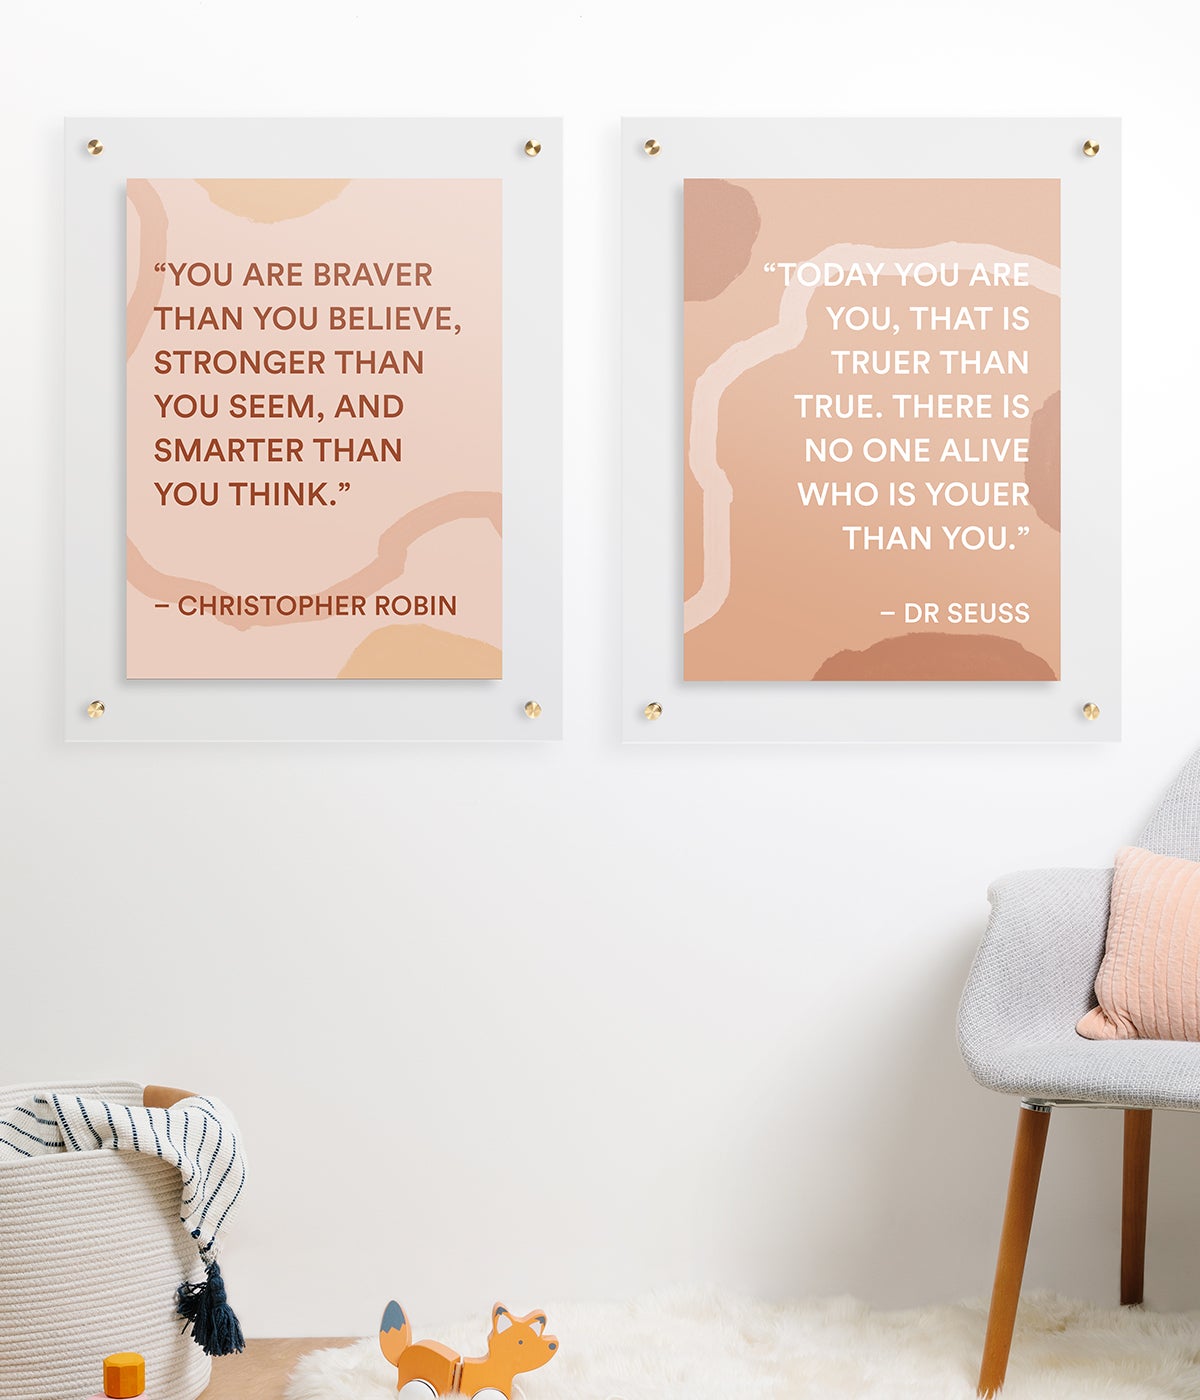 Two identical frames in nursery room with quotes from Dr. Seuss and Christopher Robin